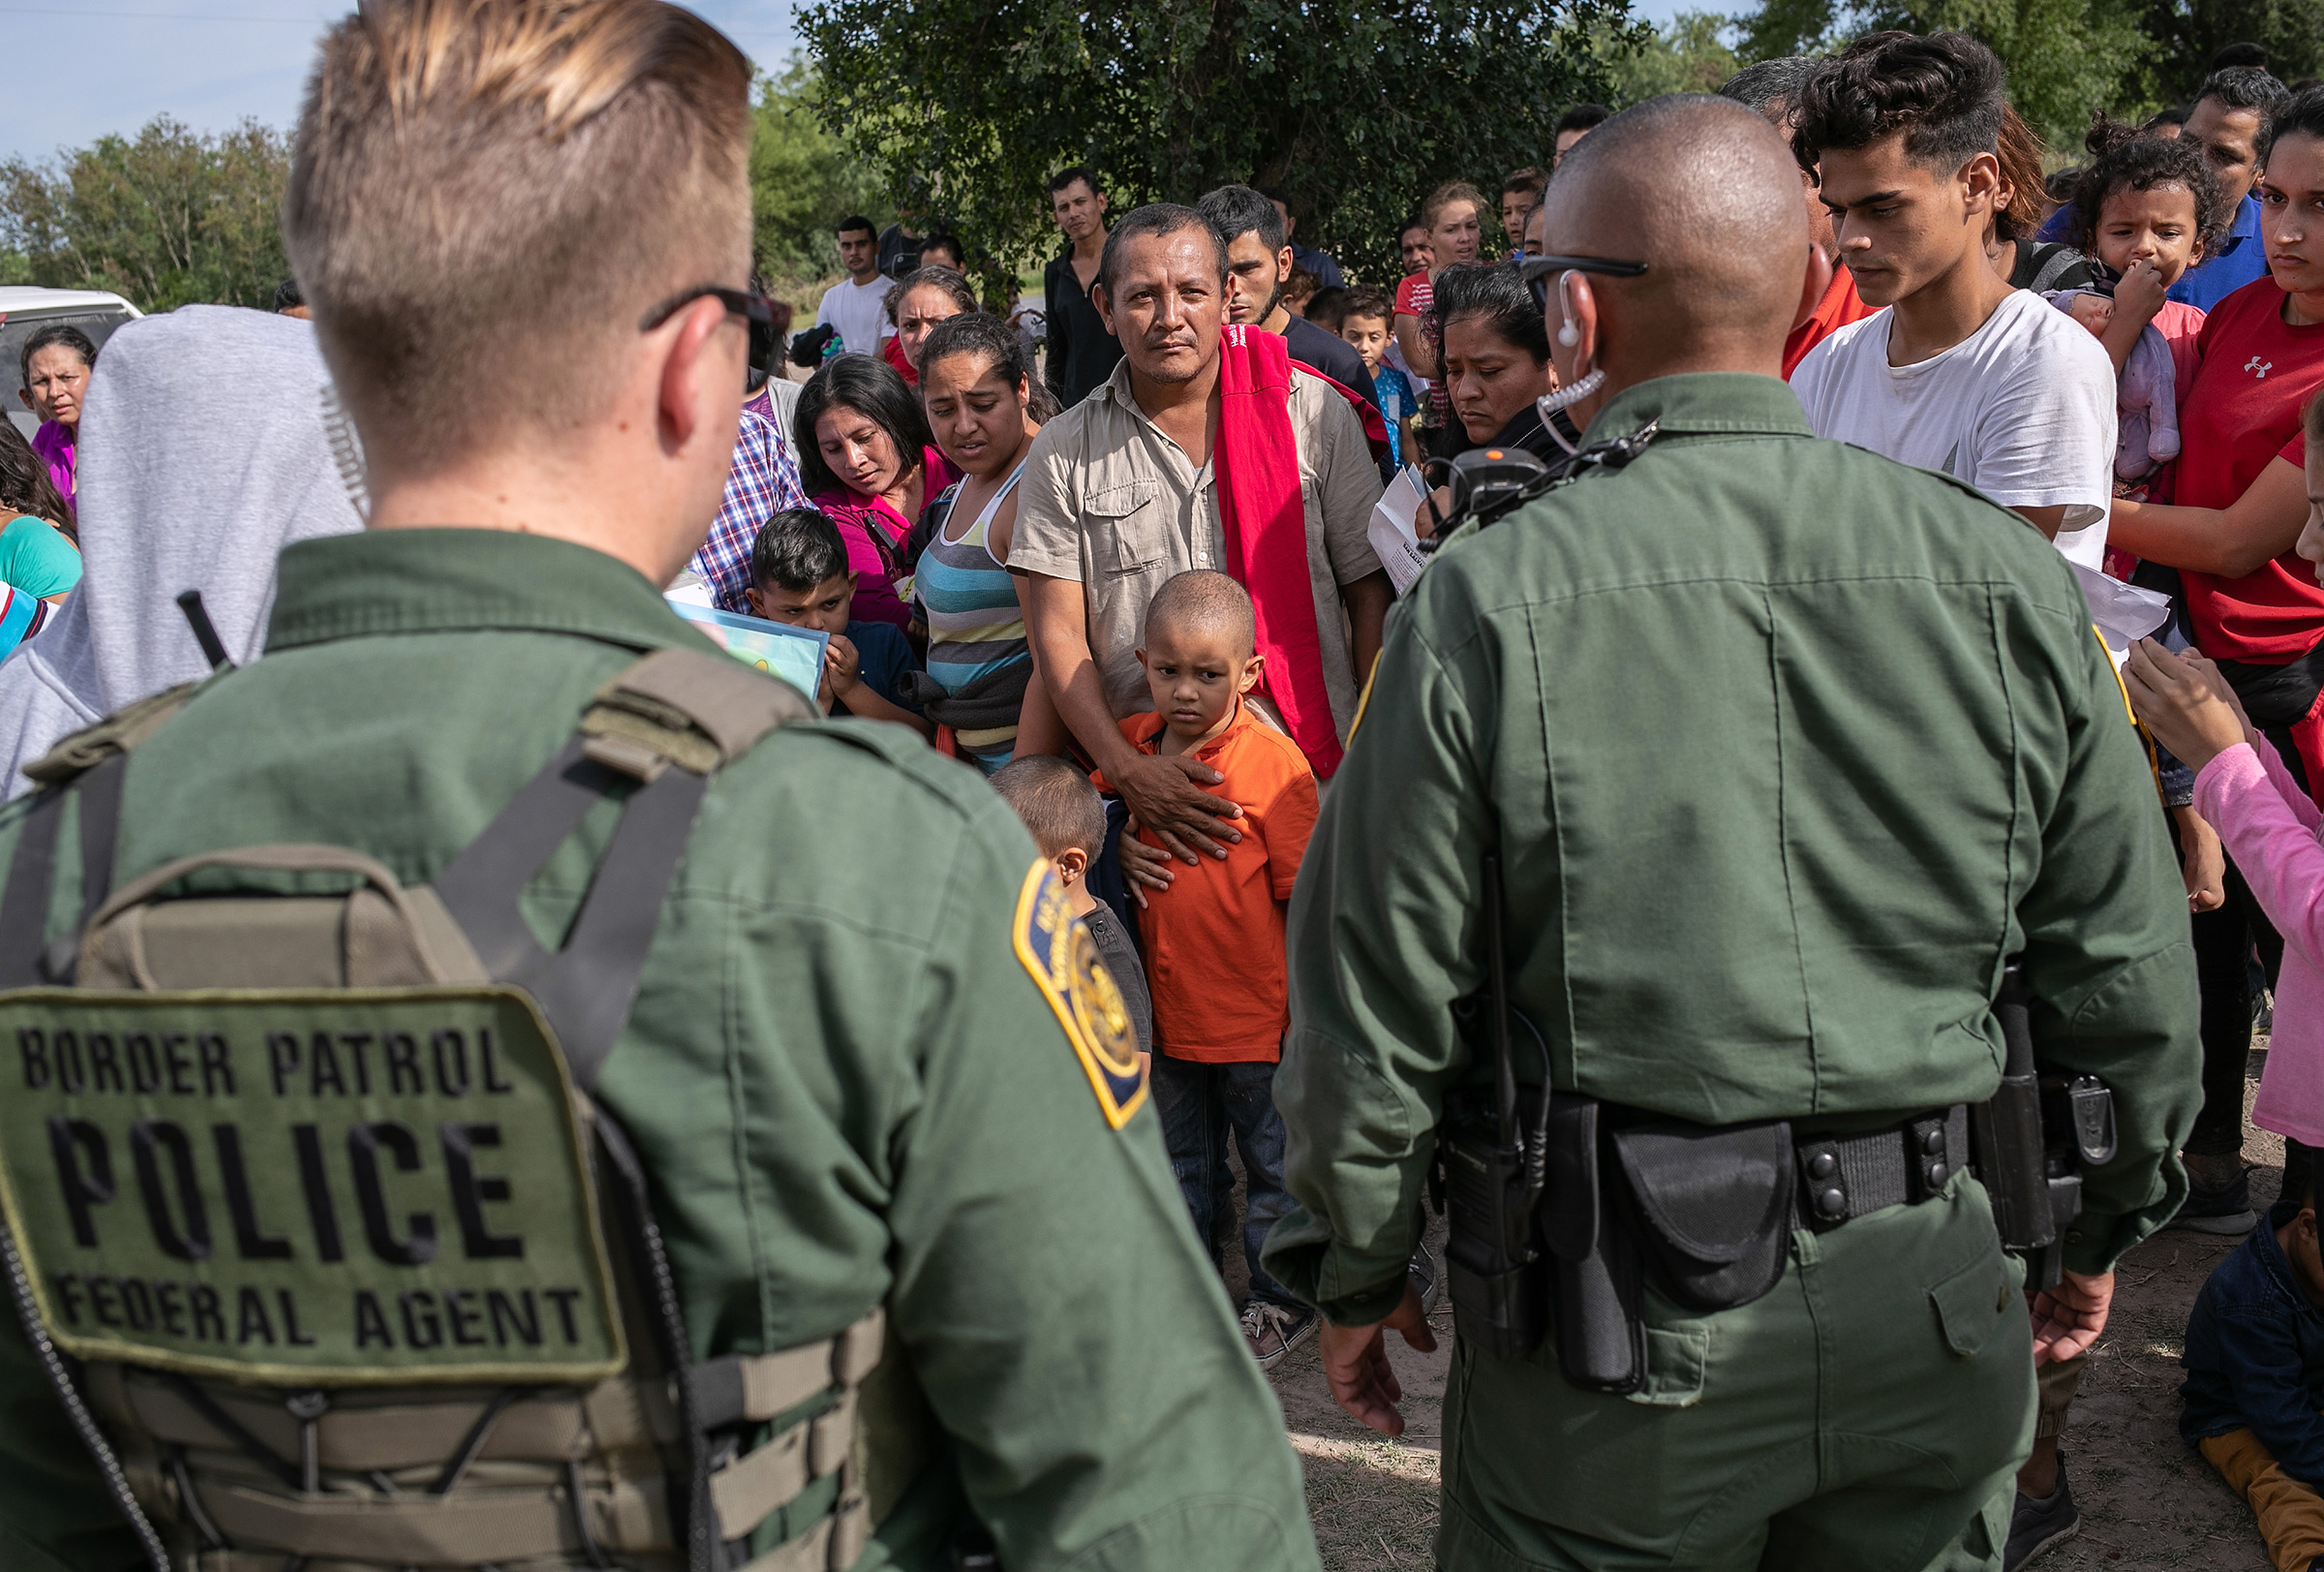 U.S. Border Patrol agents watch over immigrants after taking them into custody on July 02, 2019 in Los Ebanos, Texas. (John Moore—Getty Images)